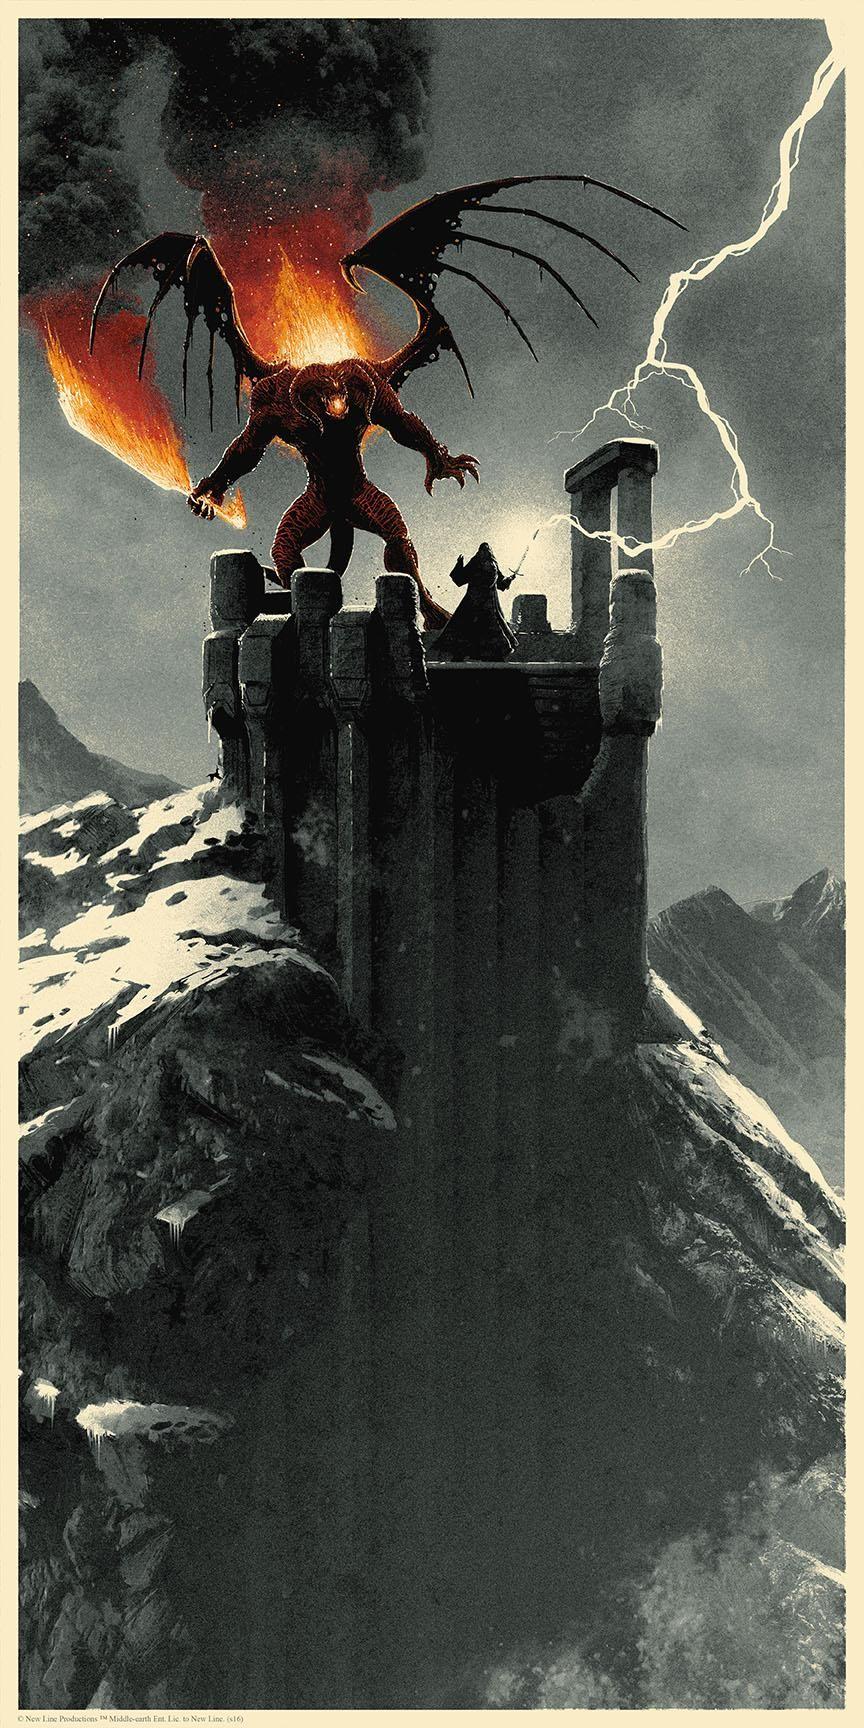 The Lord of the Rings: The Two Towers (2017) [600 x 1000]